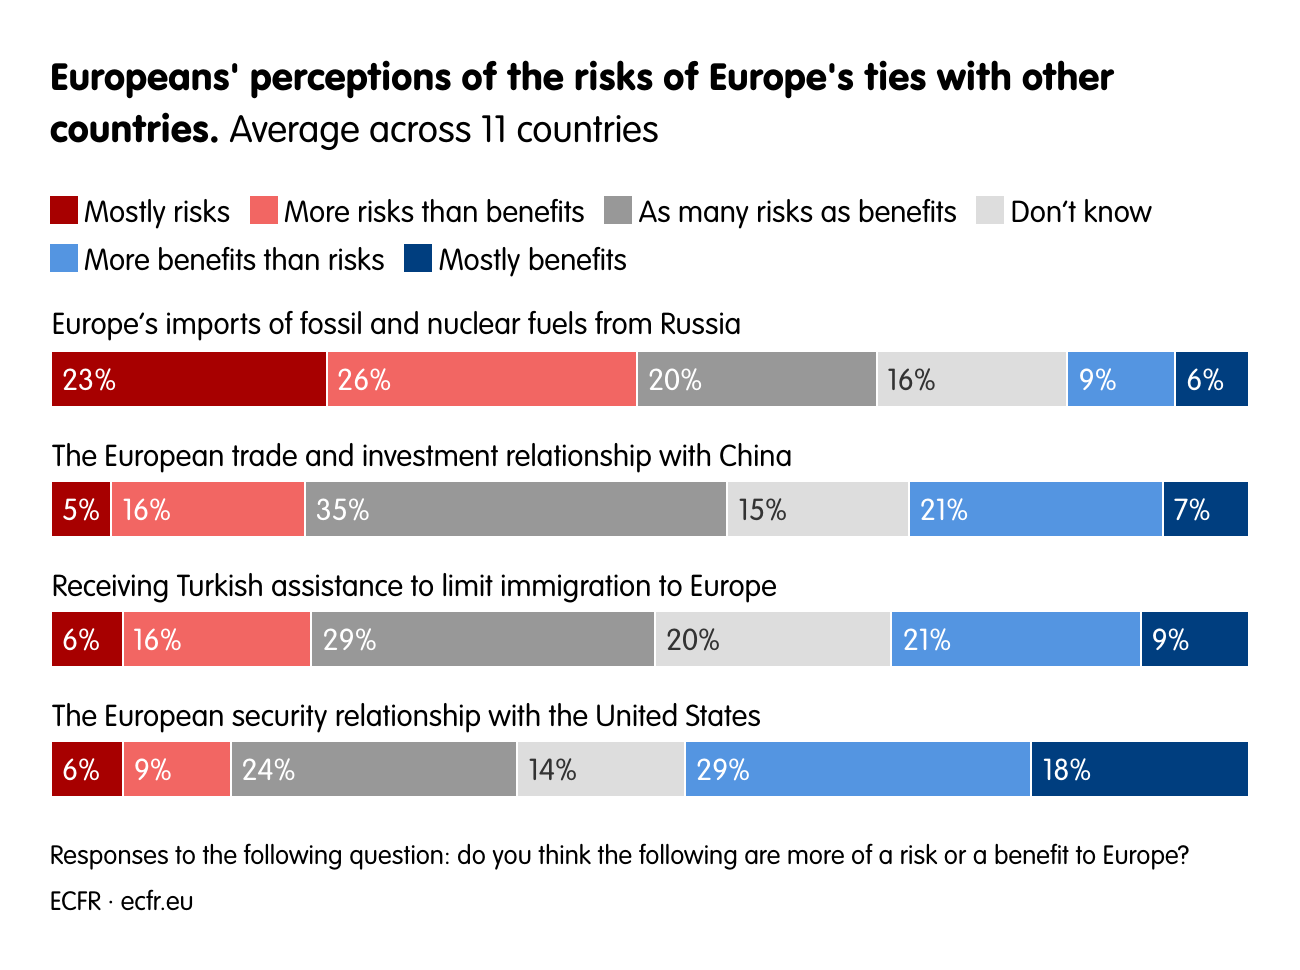 Europeans' perceptions of the risks of Europe's ties with other countries.